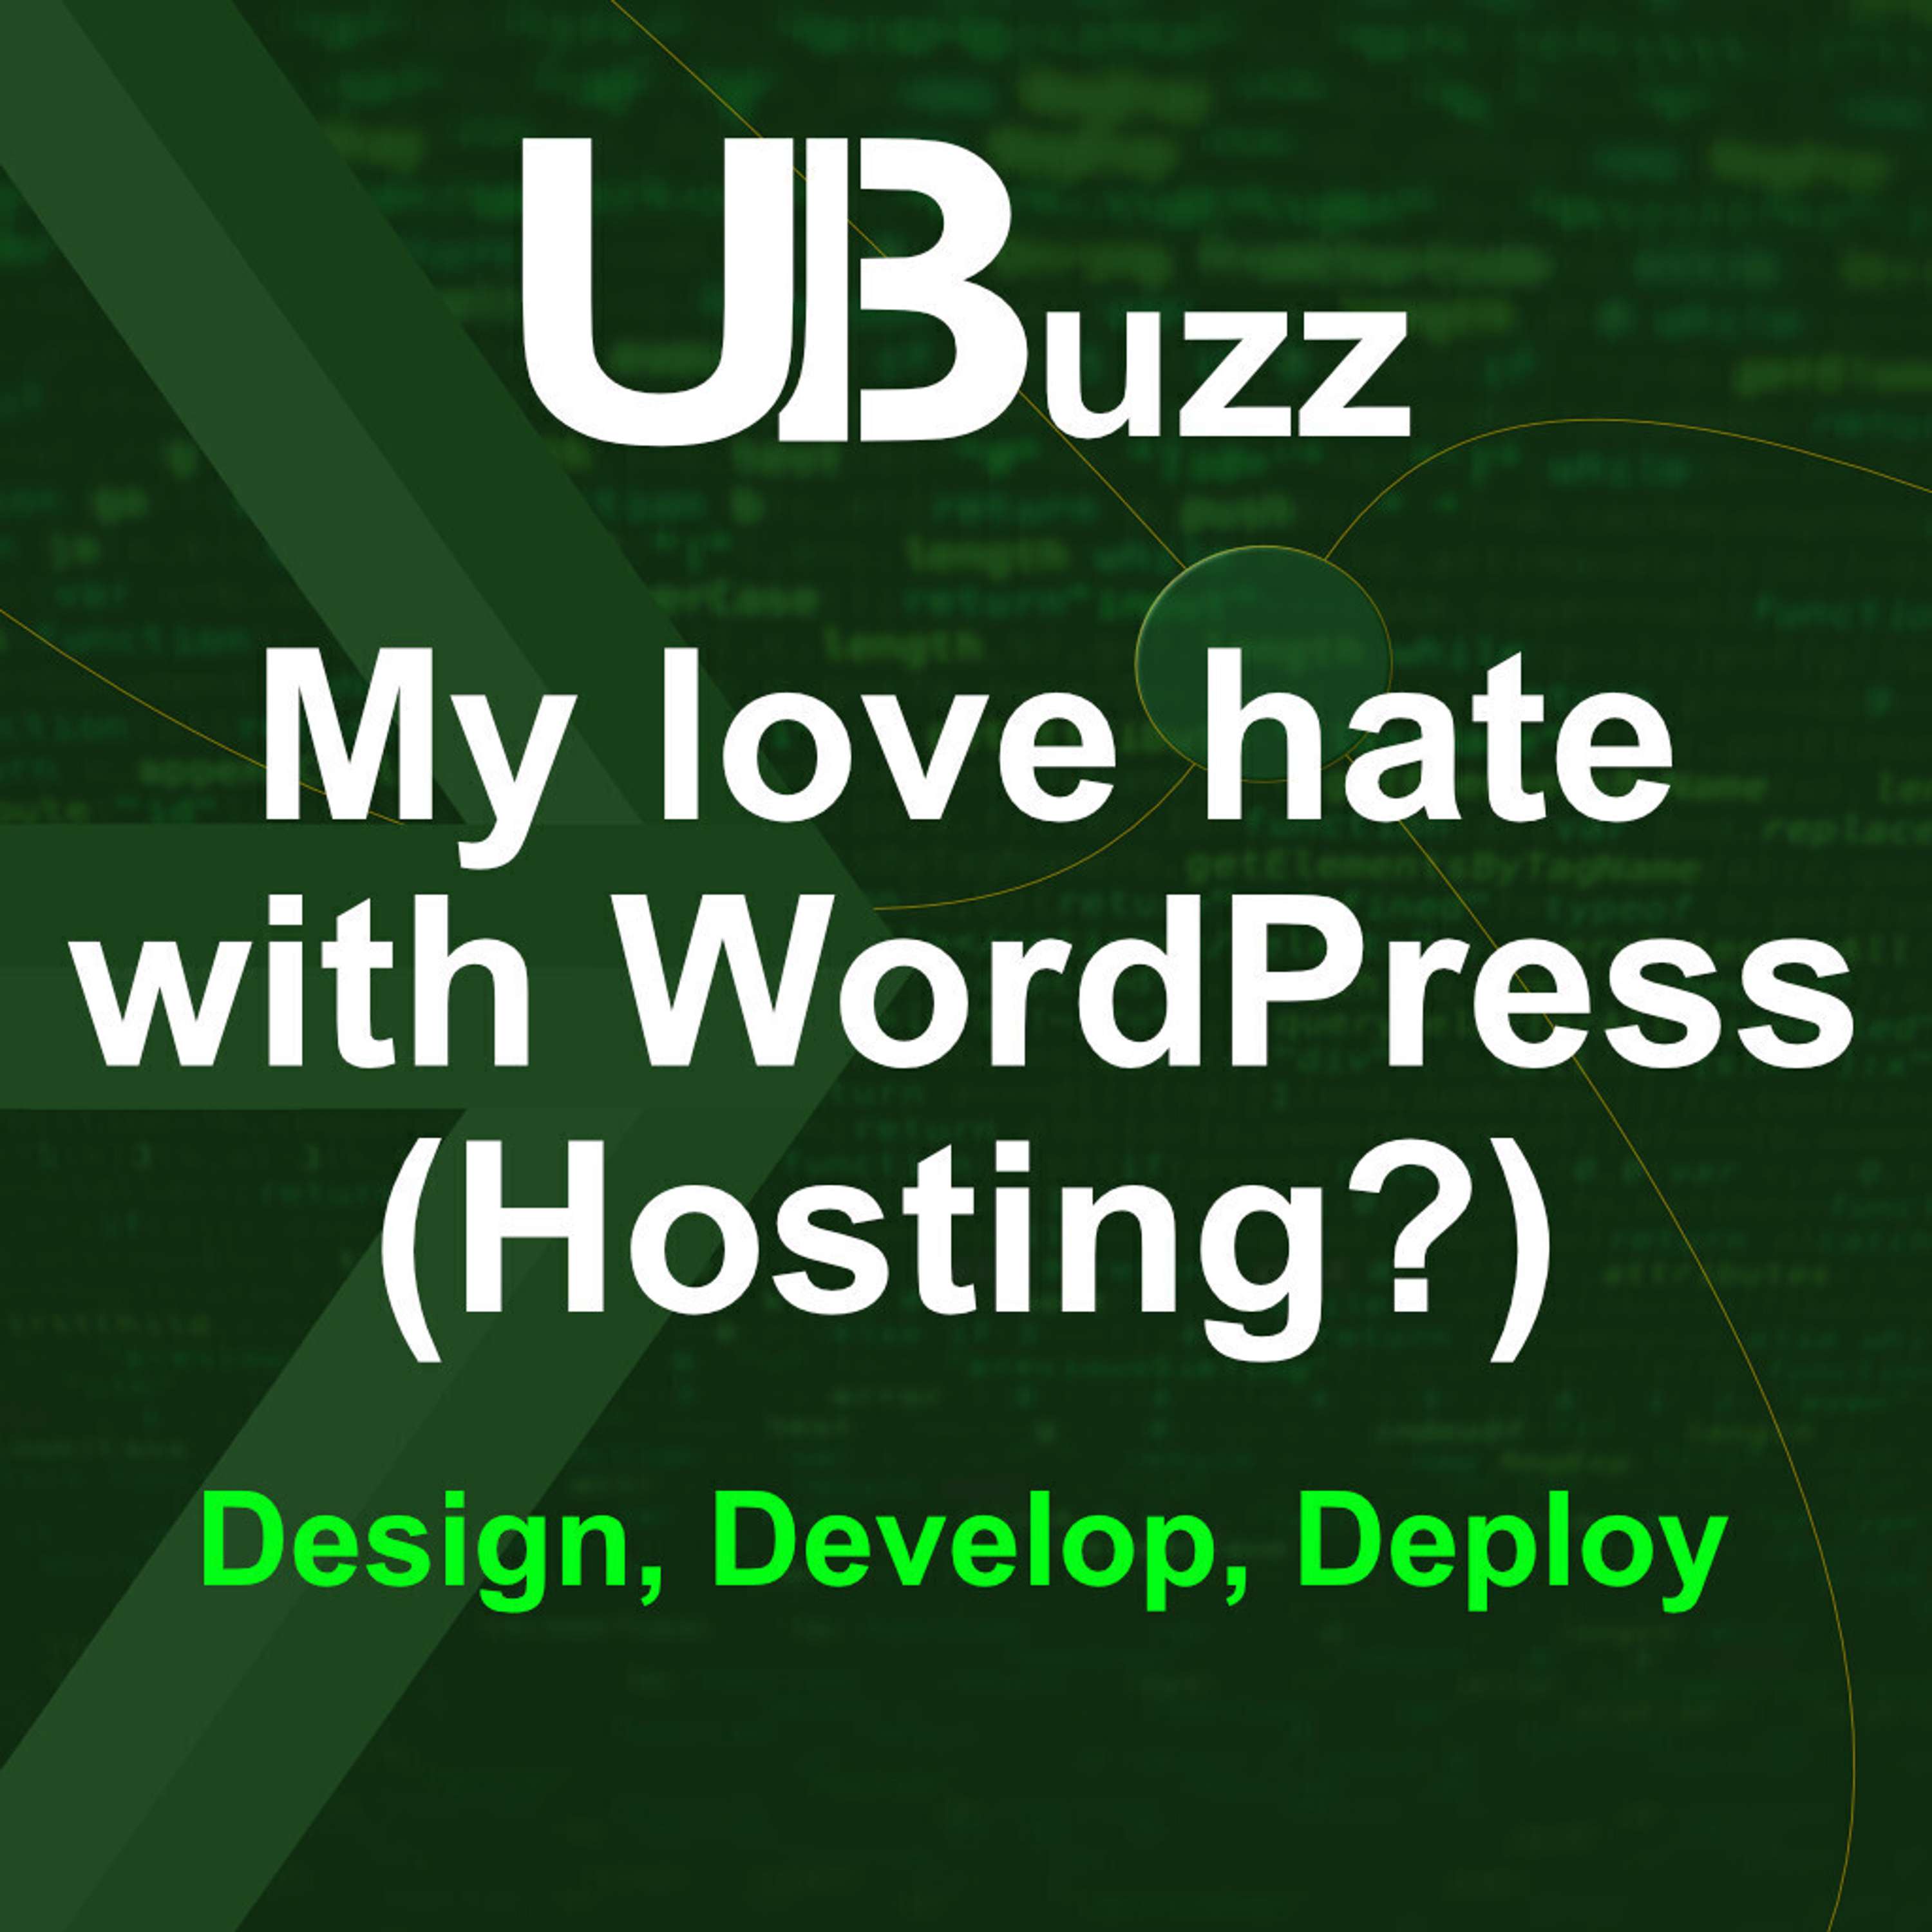 My love hate with WordPress (Hosting?) compared to static sites